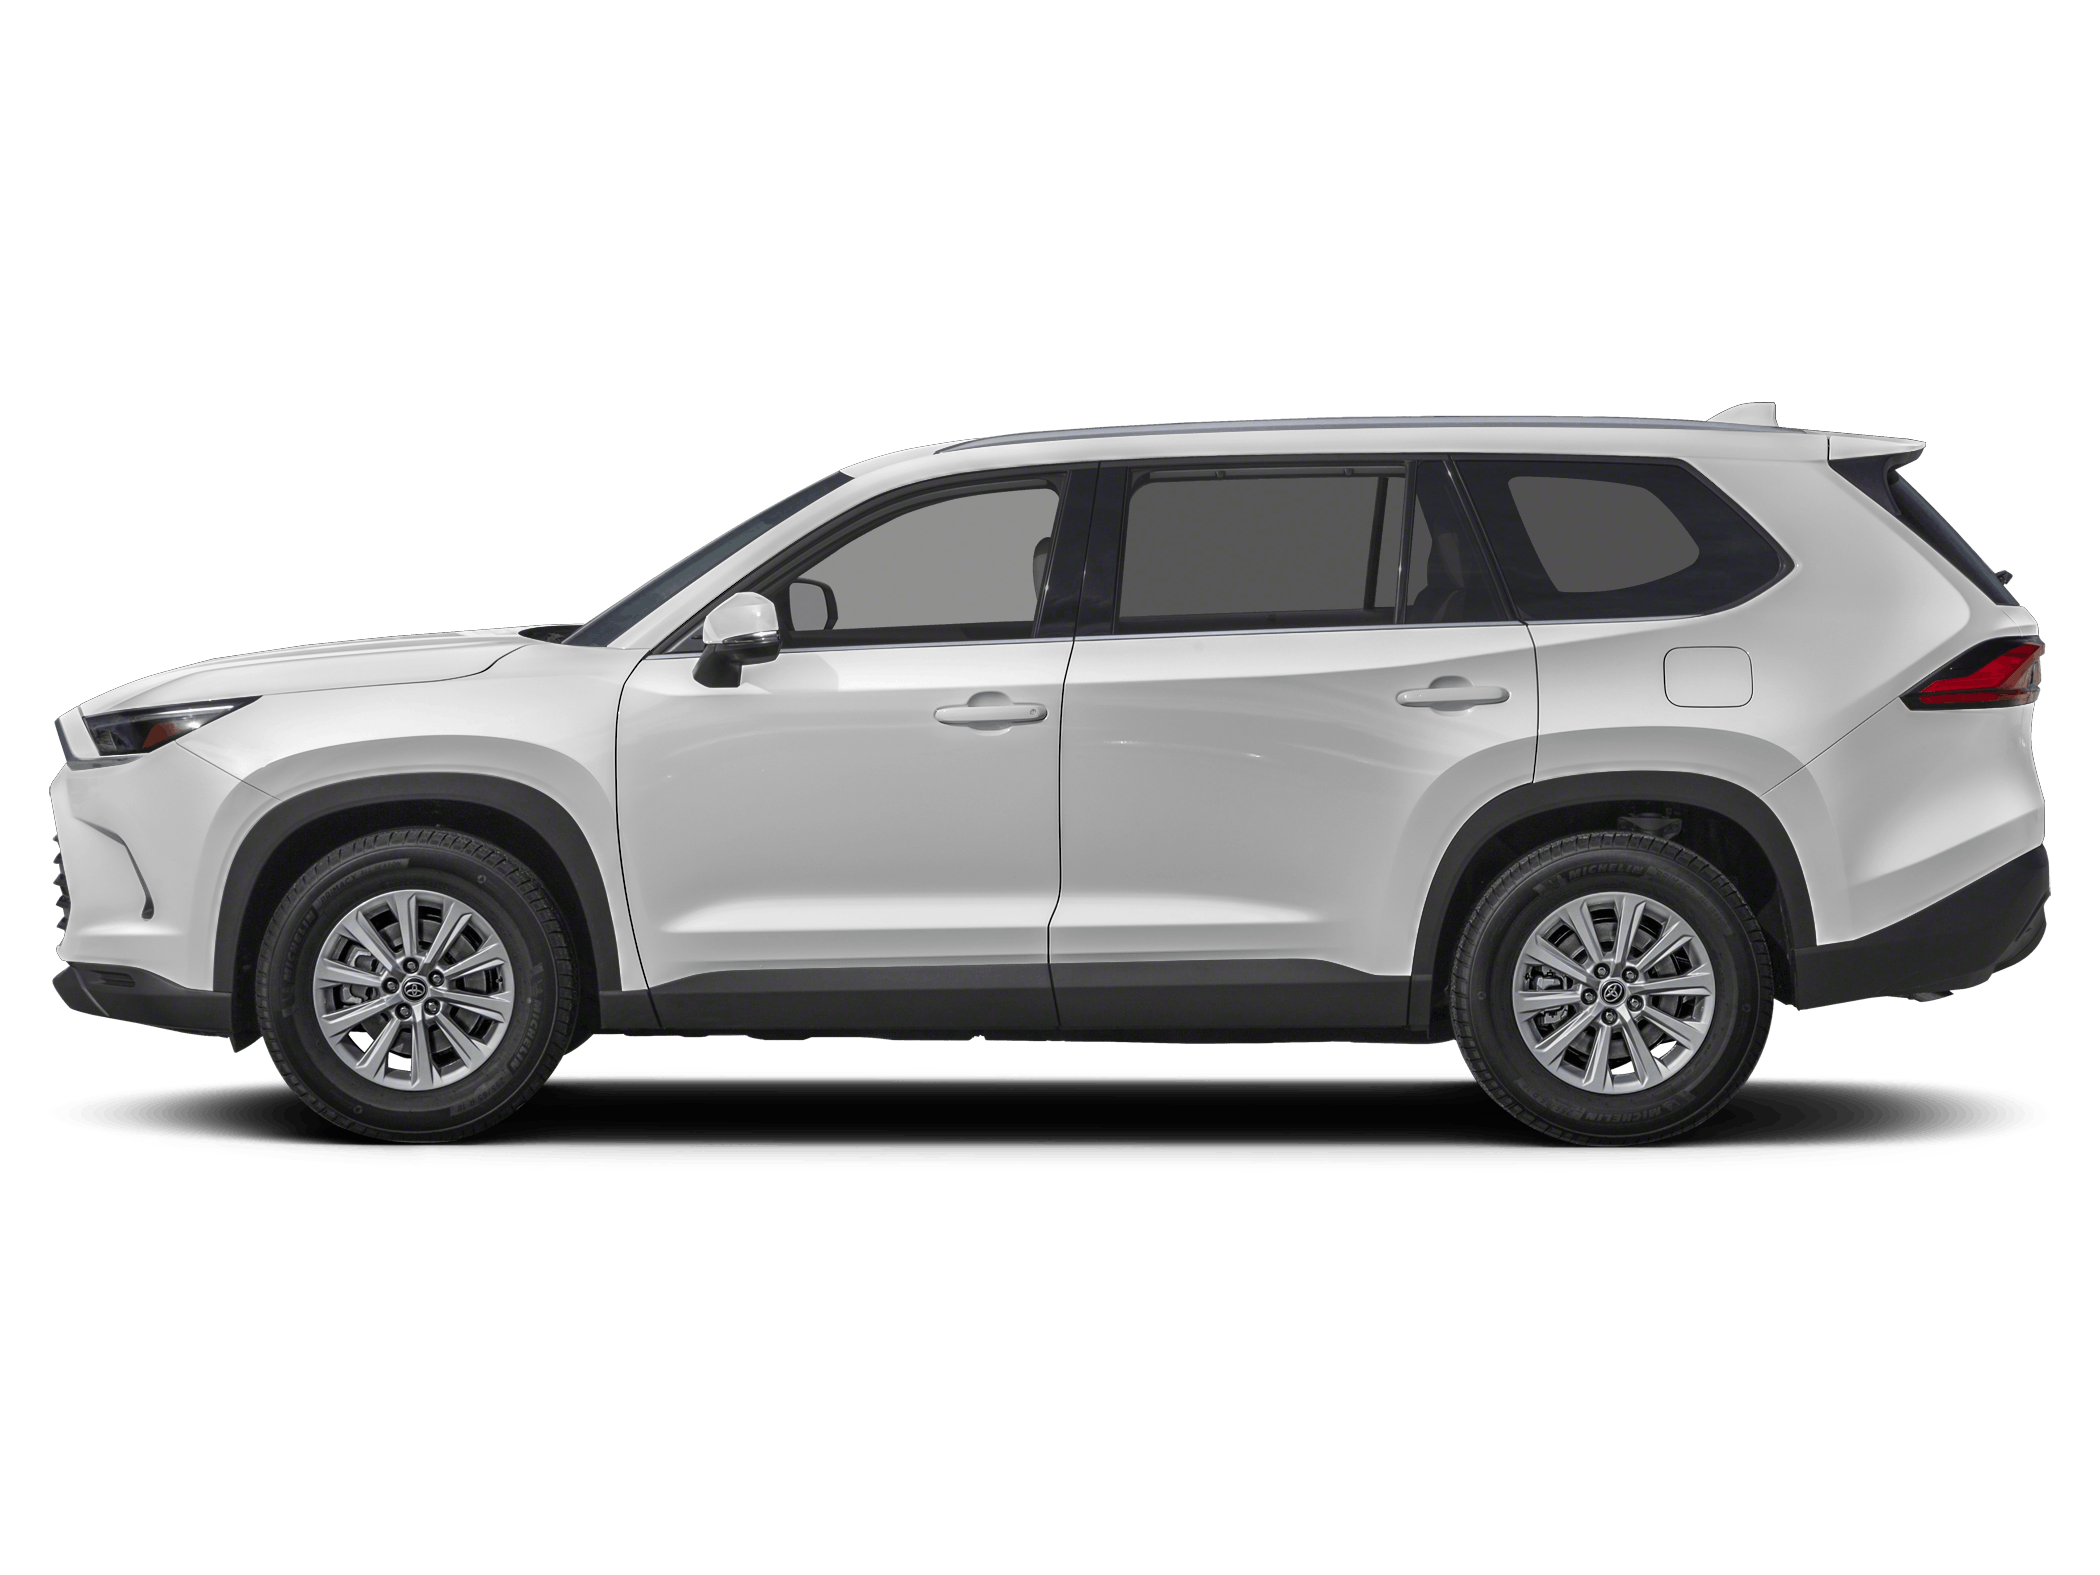 Toyota Grand Highlander Features and Specs